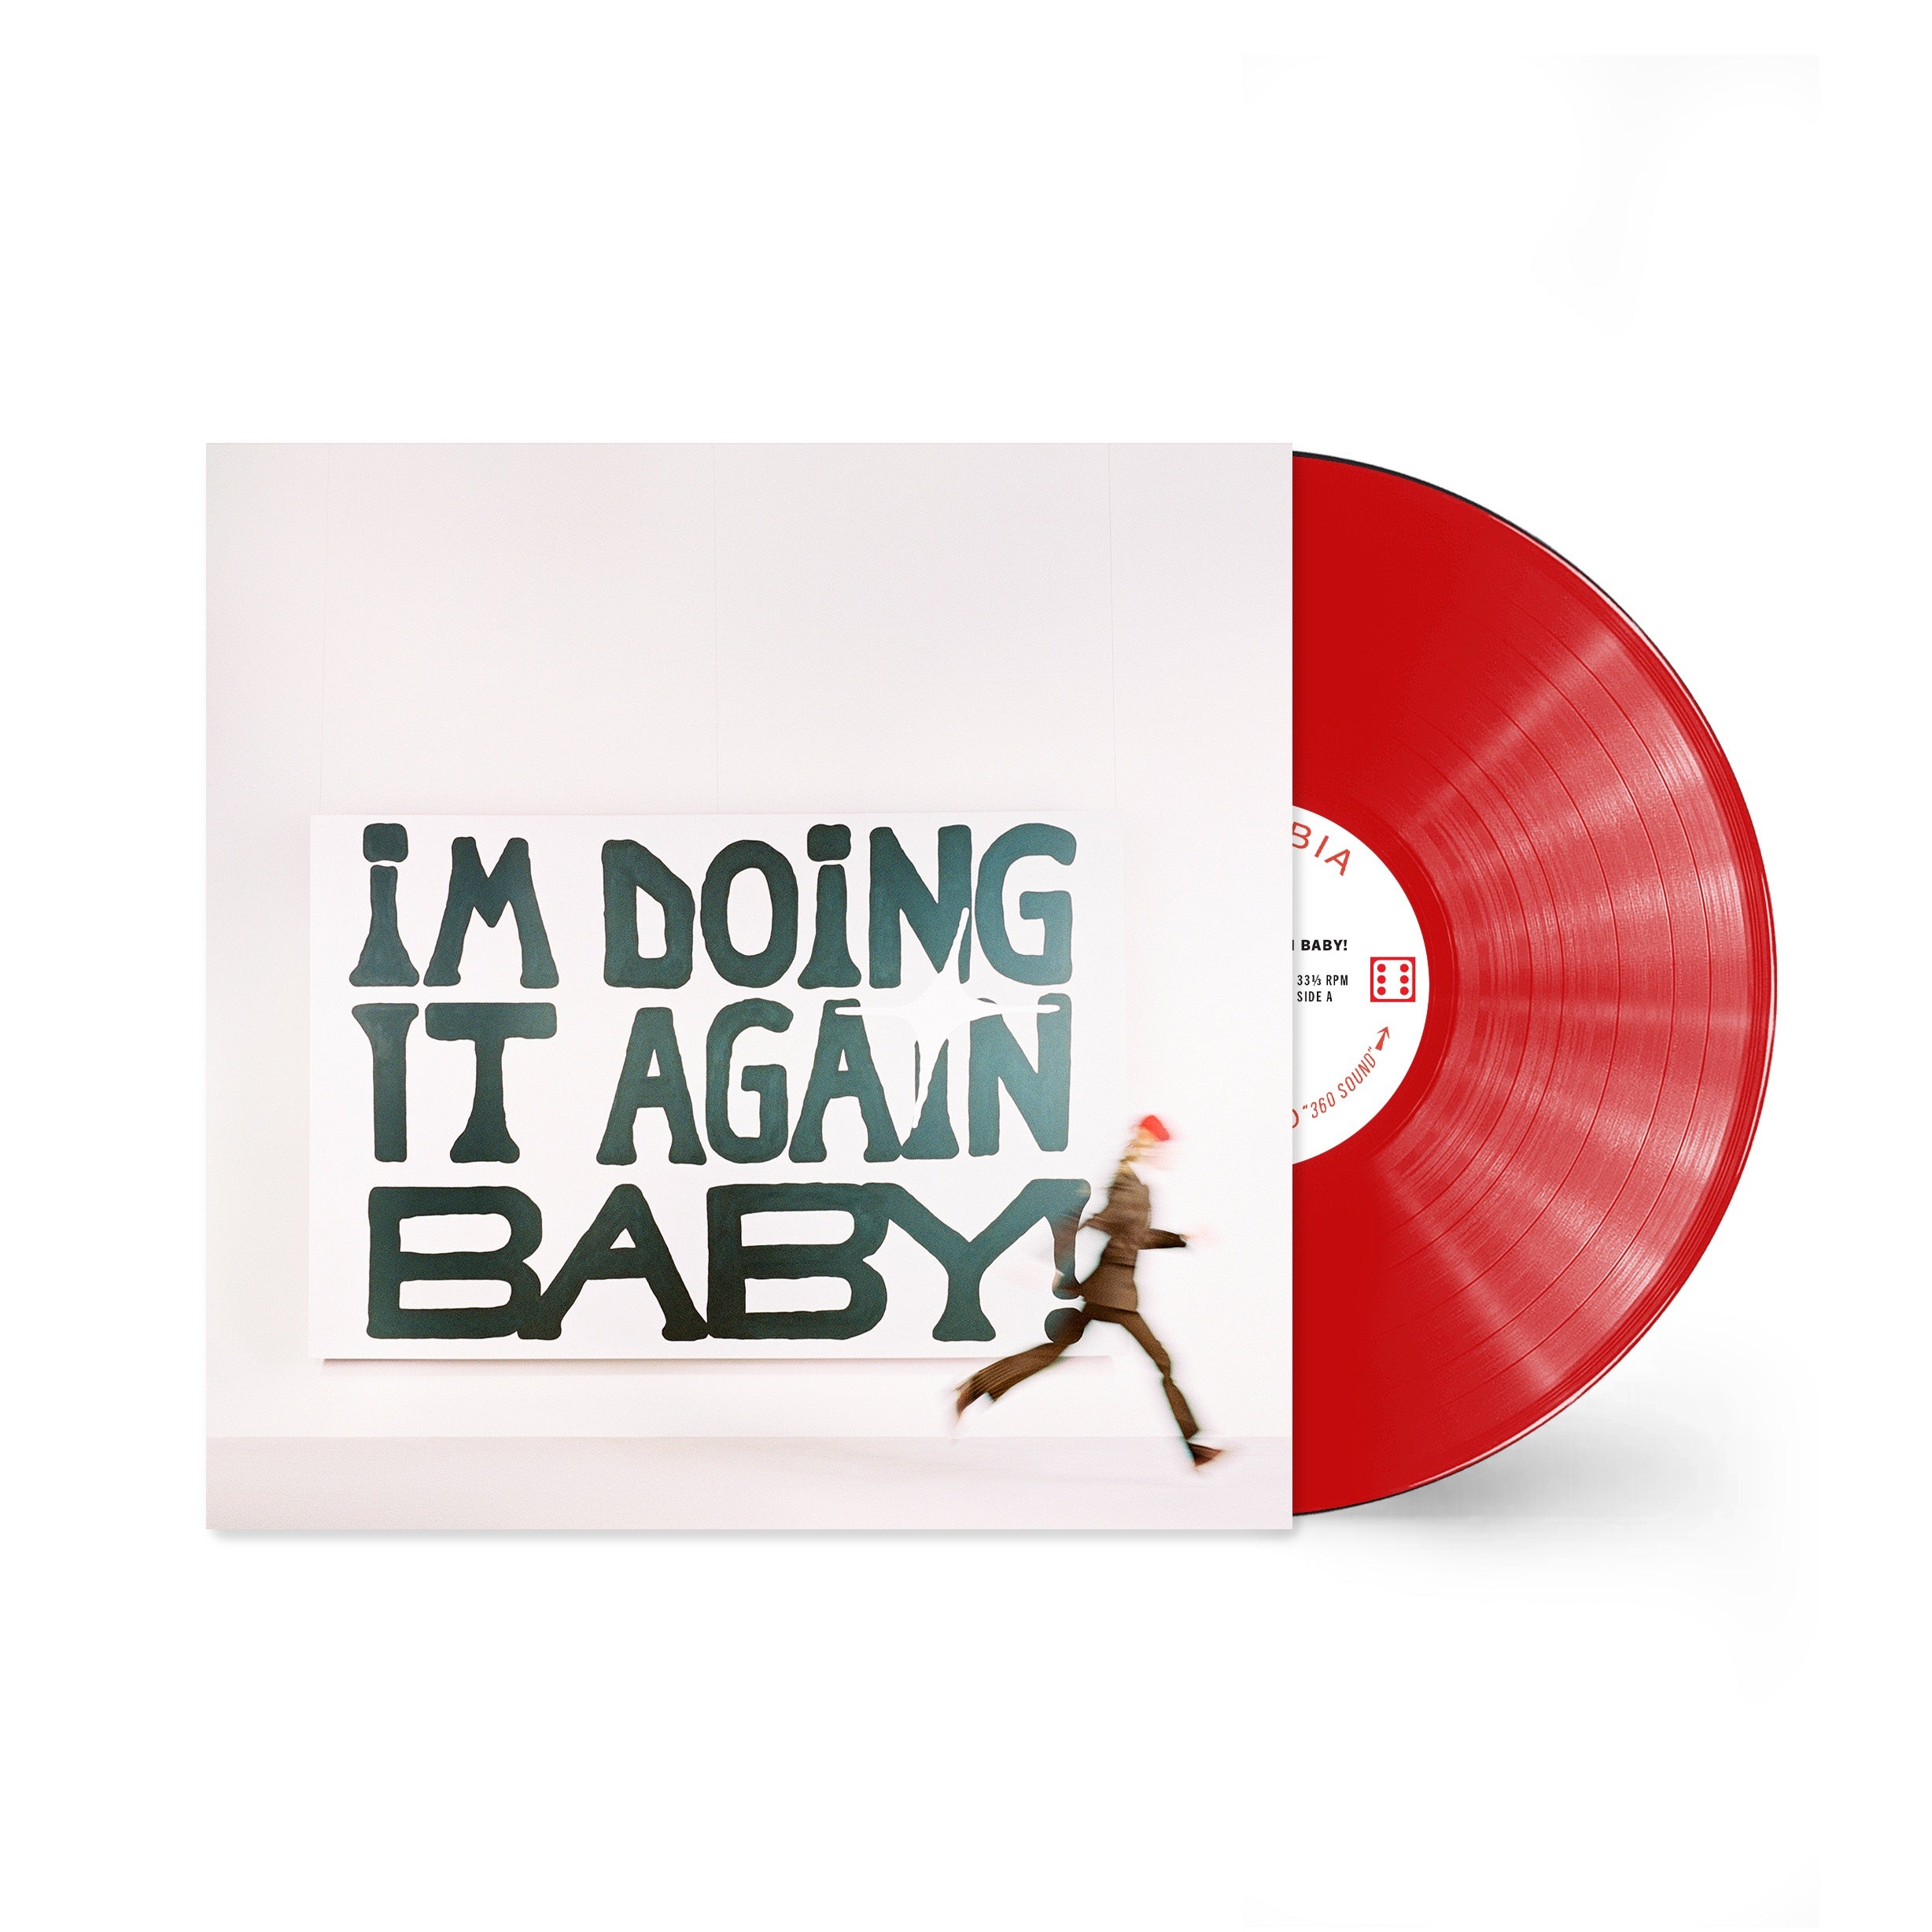 Girl in Red - I'm Doing it Again Baby! (Translucent Red Vinyl)